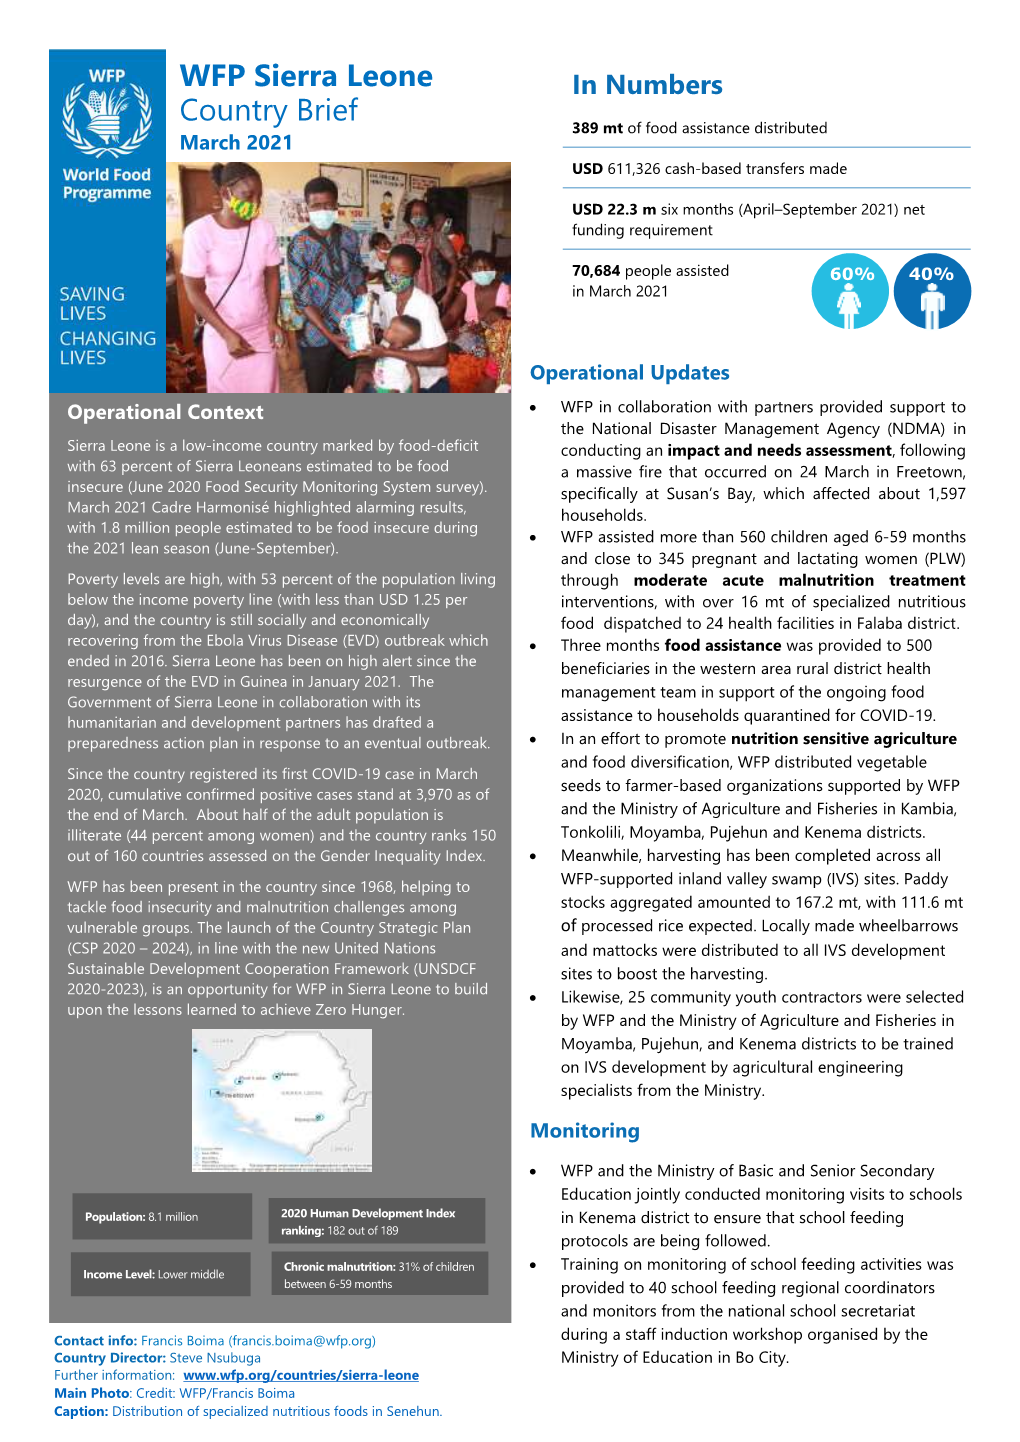 WFP Sierra Leone Country Brief March 2021